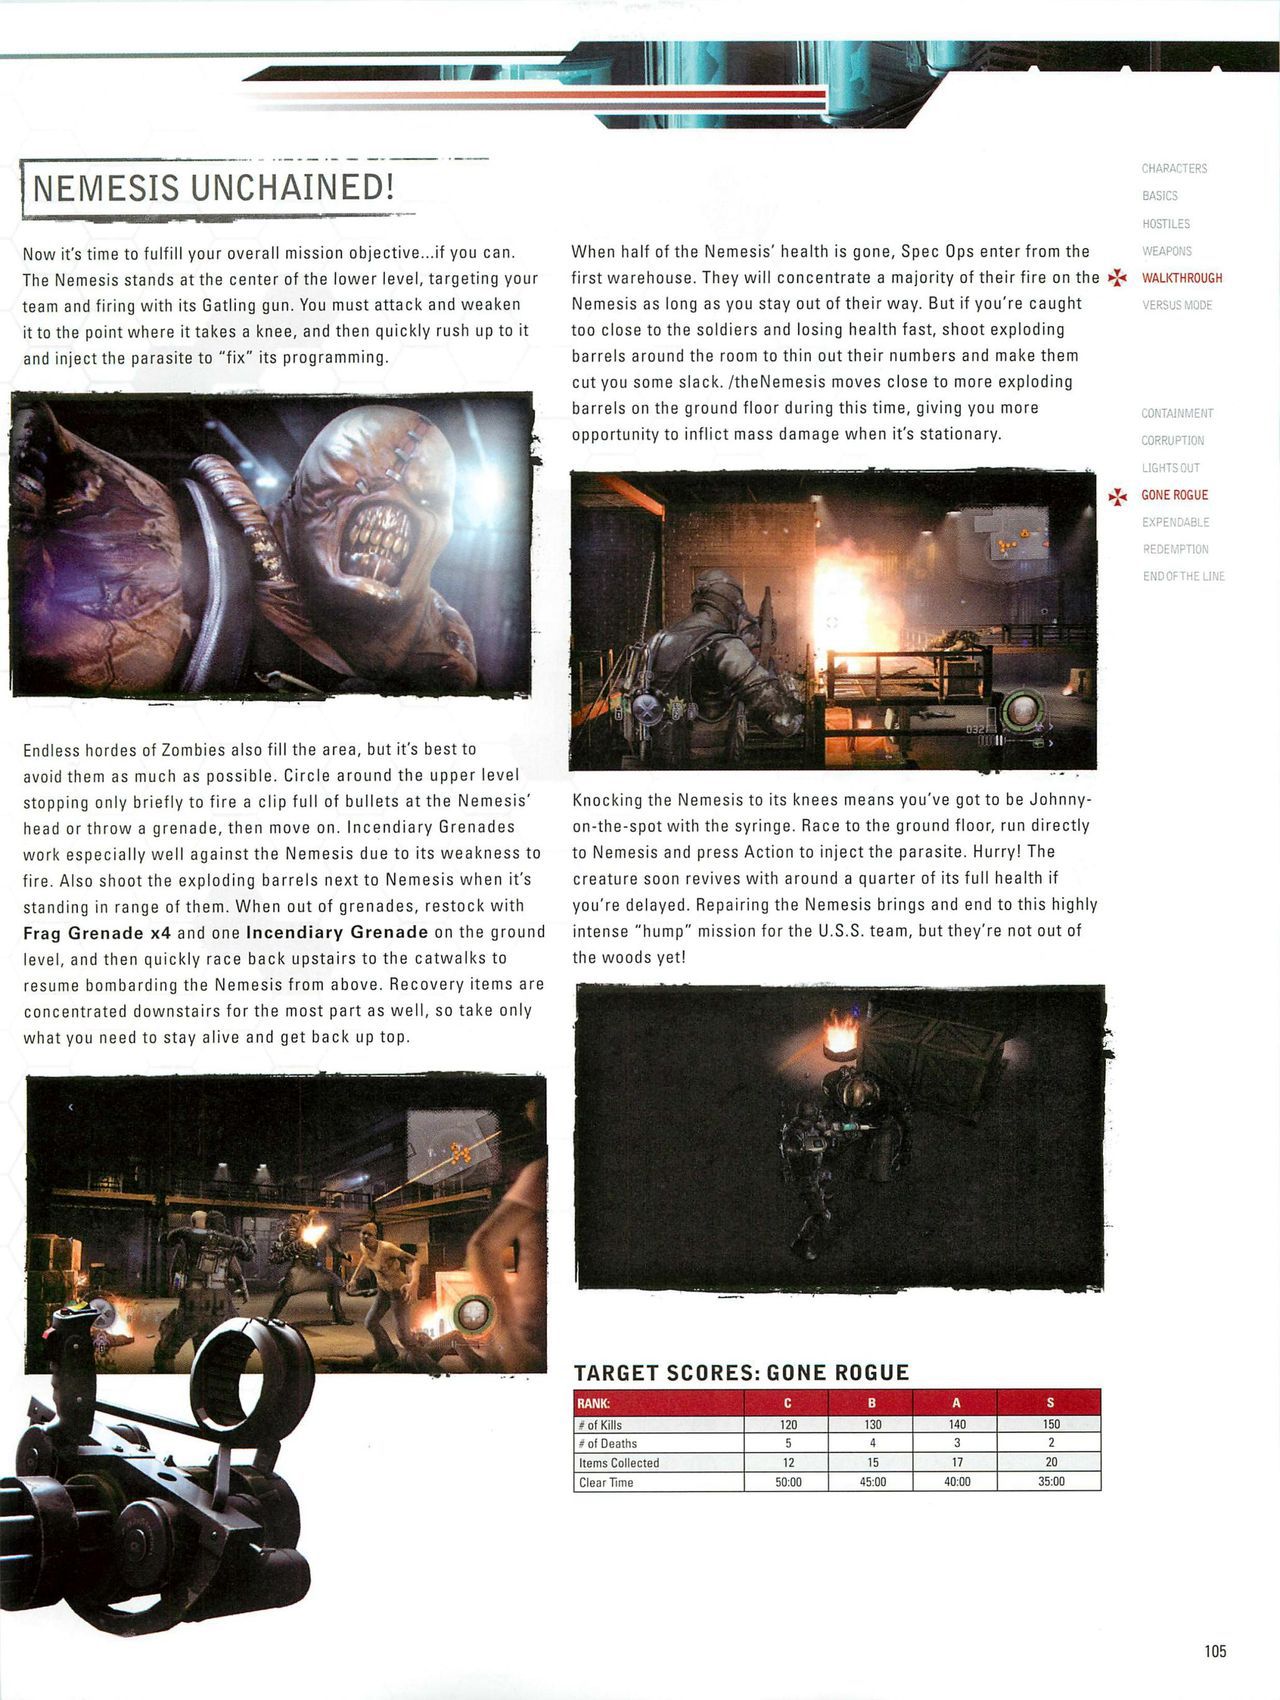 Resident Evil: Operation Raccoon City Official Strategy Guide (watermarked) 107